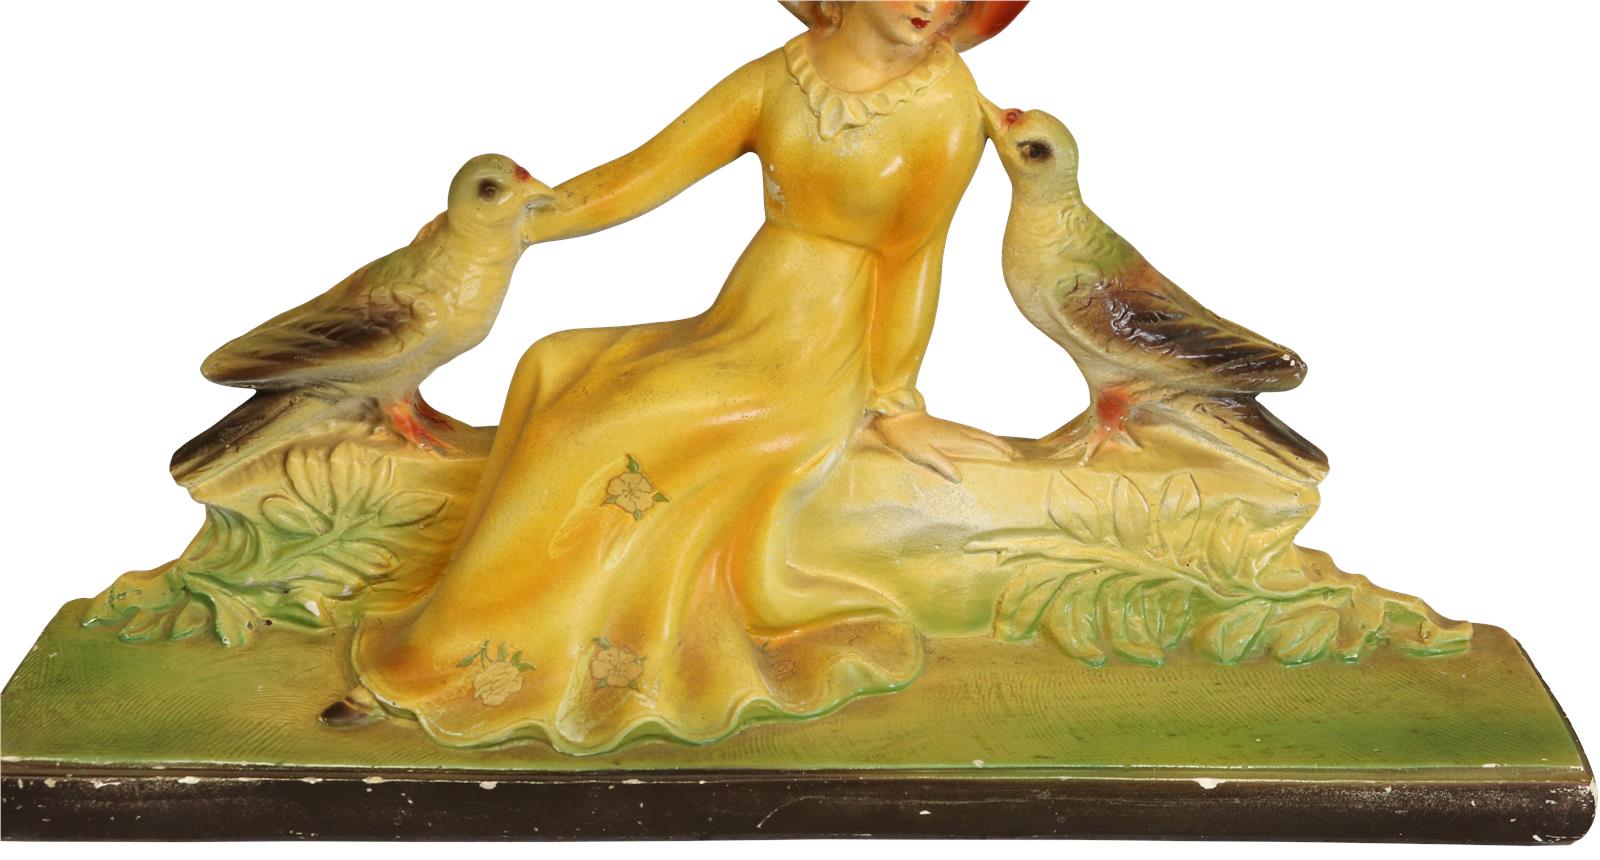 Colorful Antique Art Deco Chalkware Sculpture of Lady with Birds and Pair of Vases-Image 4